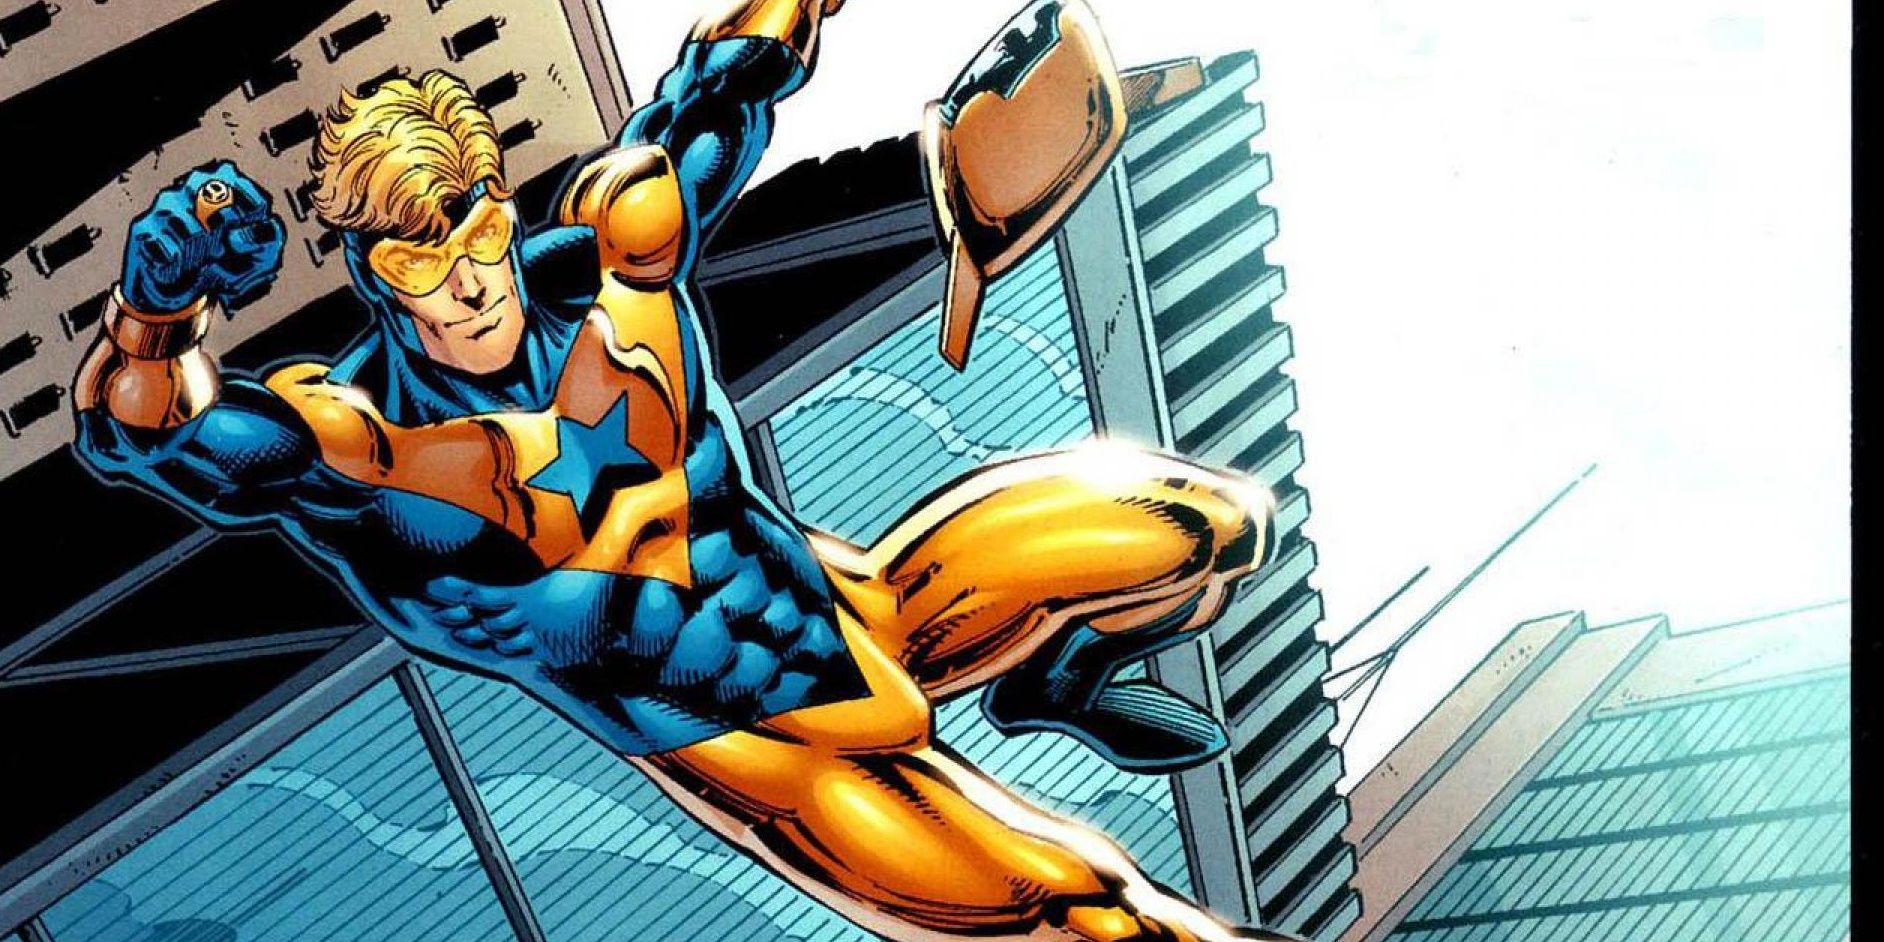 Booster Gold flying through the air in 52, DC Comics.